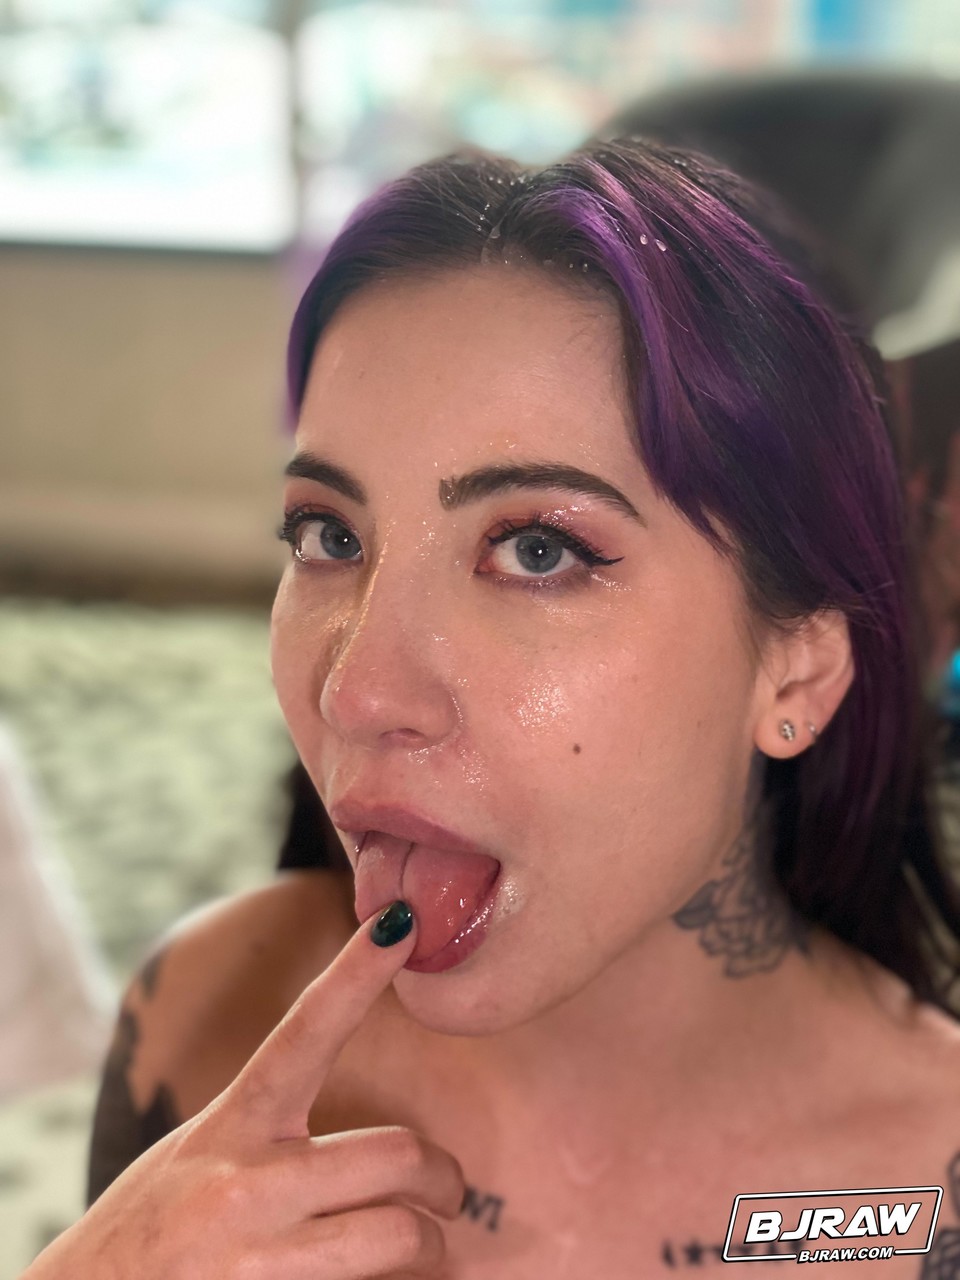 Brunette babe with tattoos Charlotte Sartre takes a dick in her mouth porno fotoğrafı #424561435 | BJ Raw Pics, Charlotte Sartre, Tattoo, mobil porno